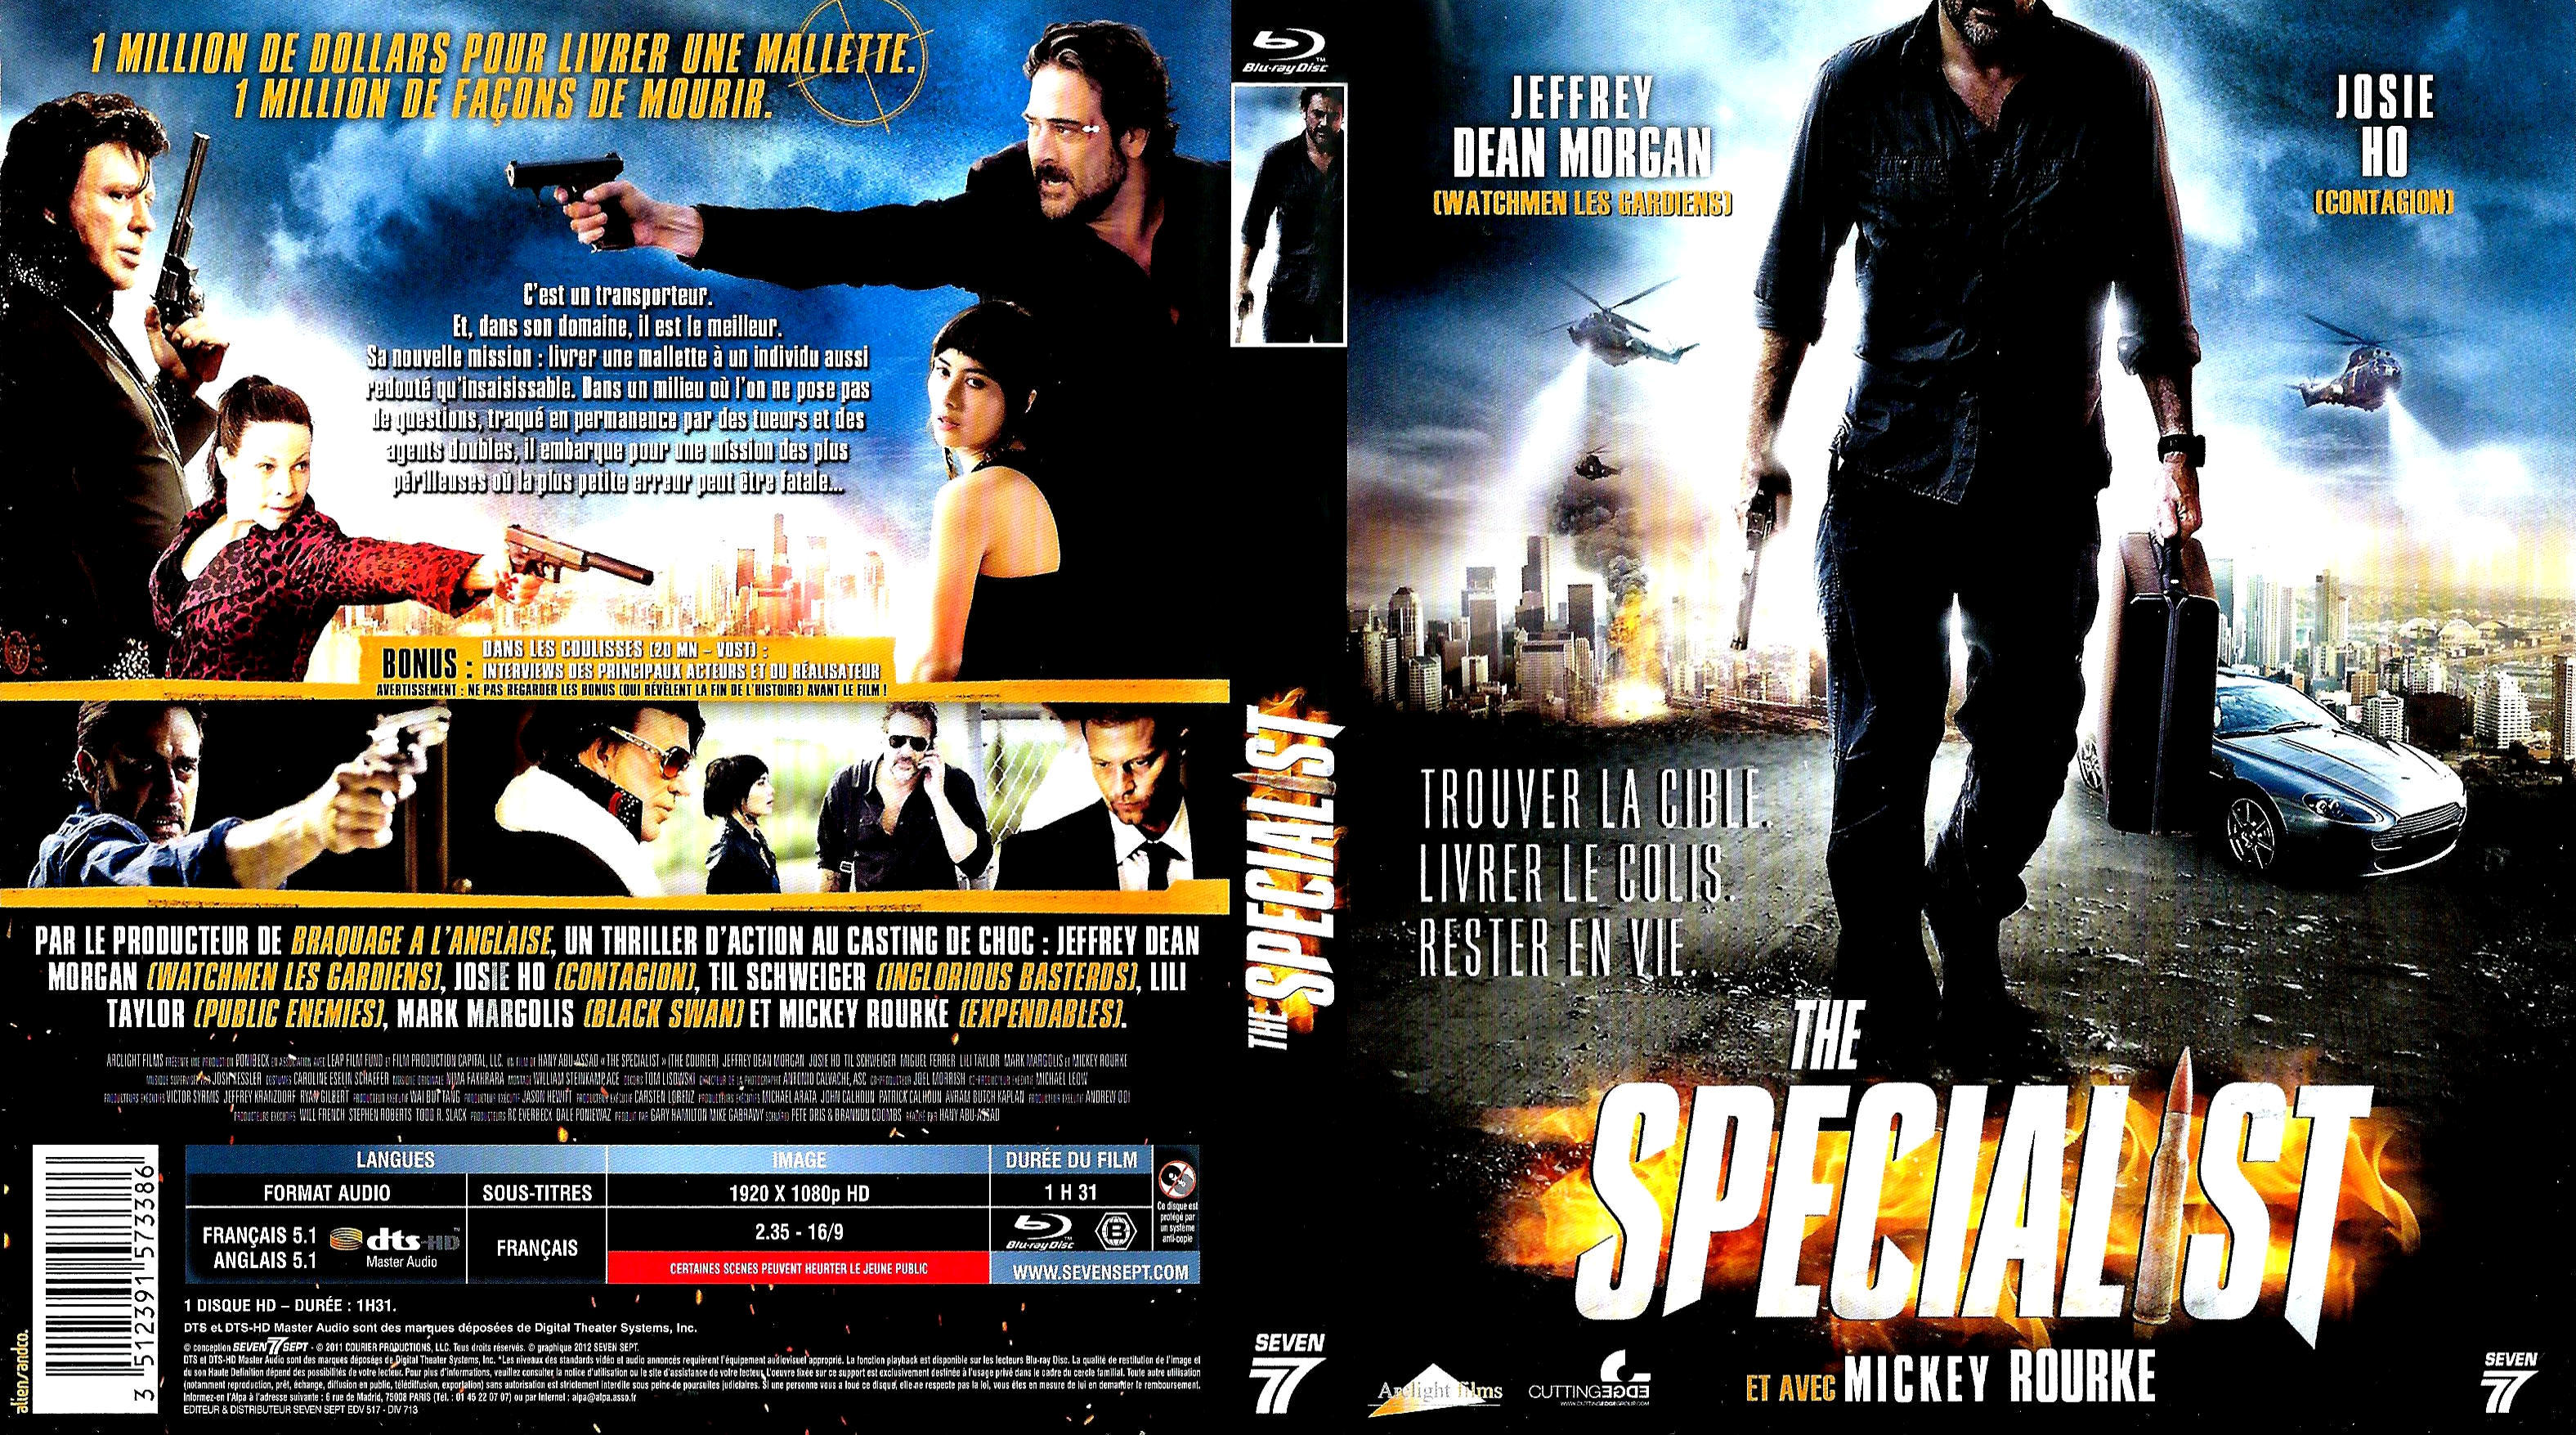 Jaquette DVD The specialist (BLU-RAY)